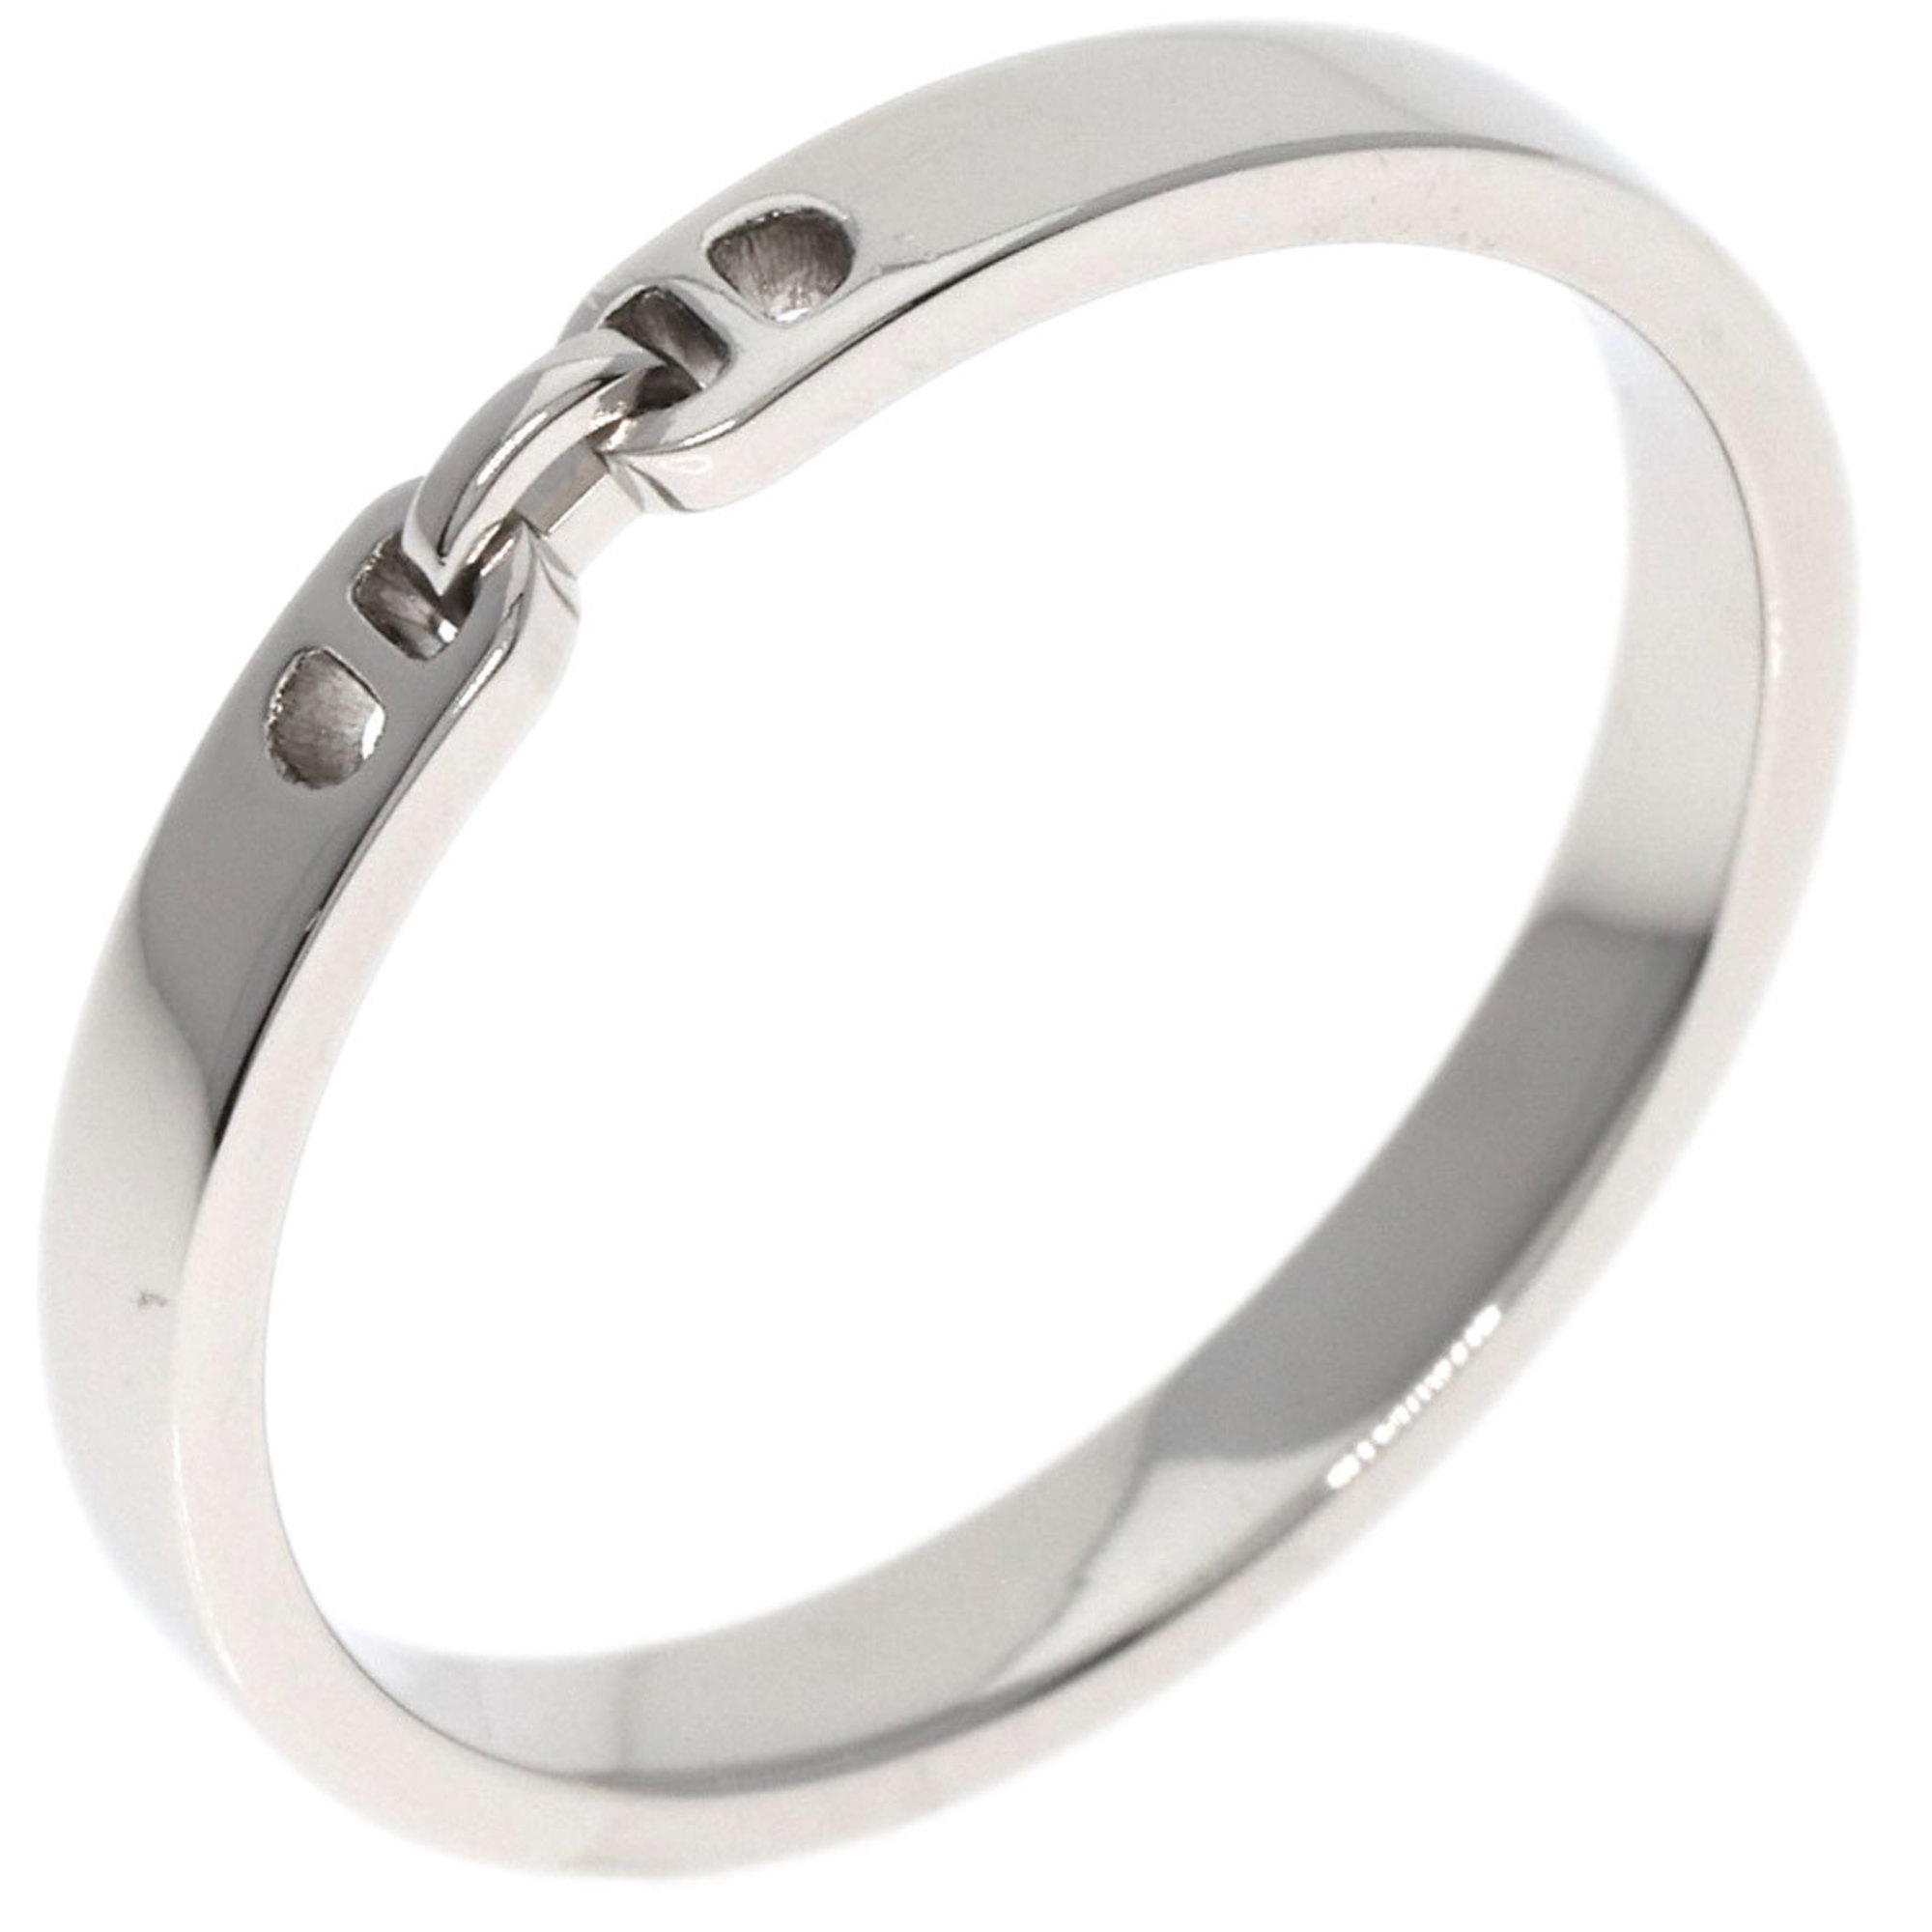 Hermes Ever Chaine d'Ancre PM #55 Ring, Platinum PT950, Women's HERMES